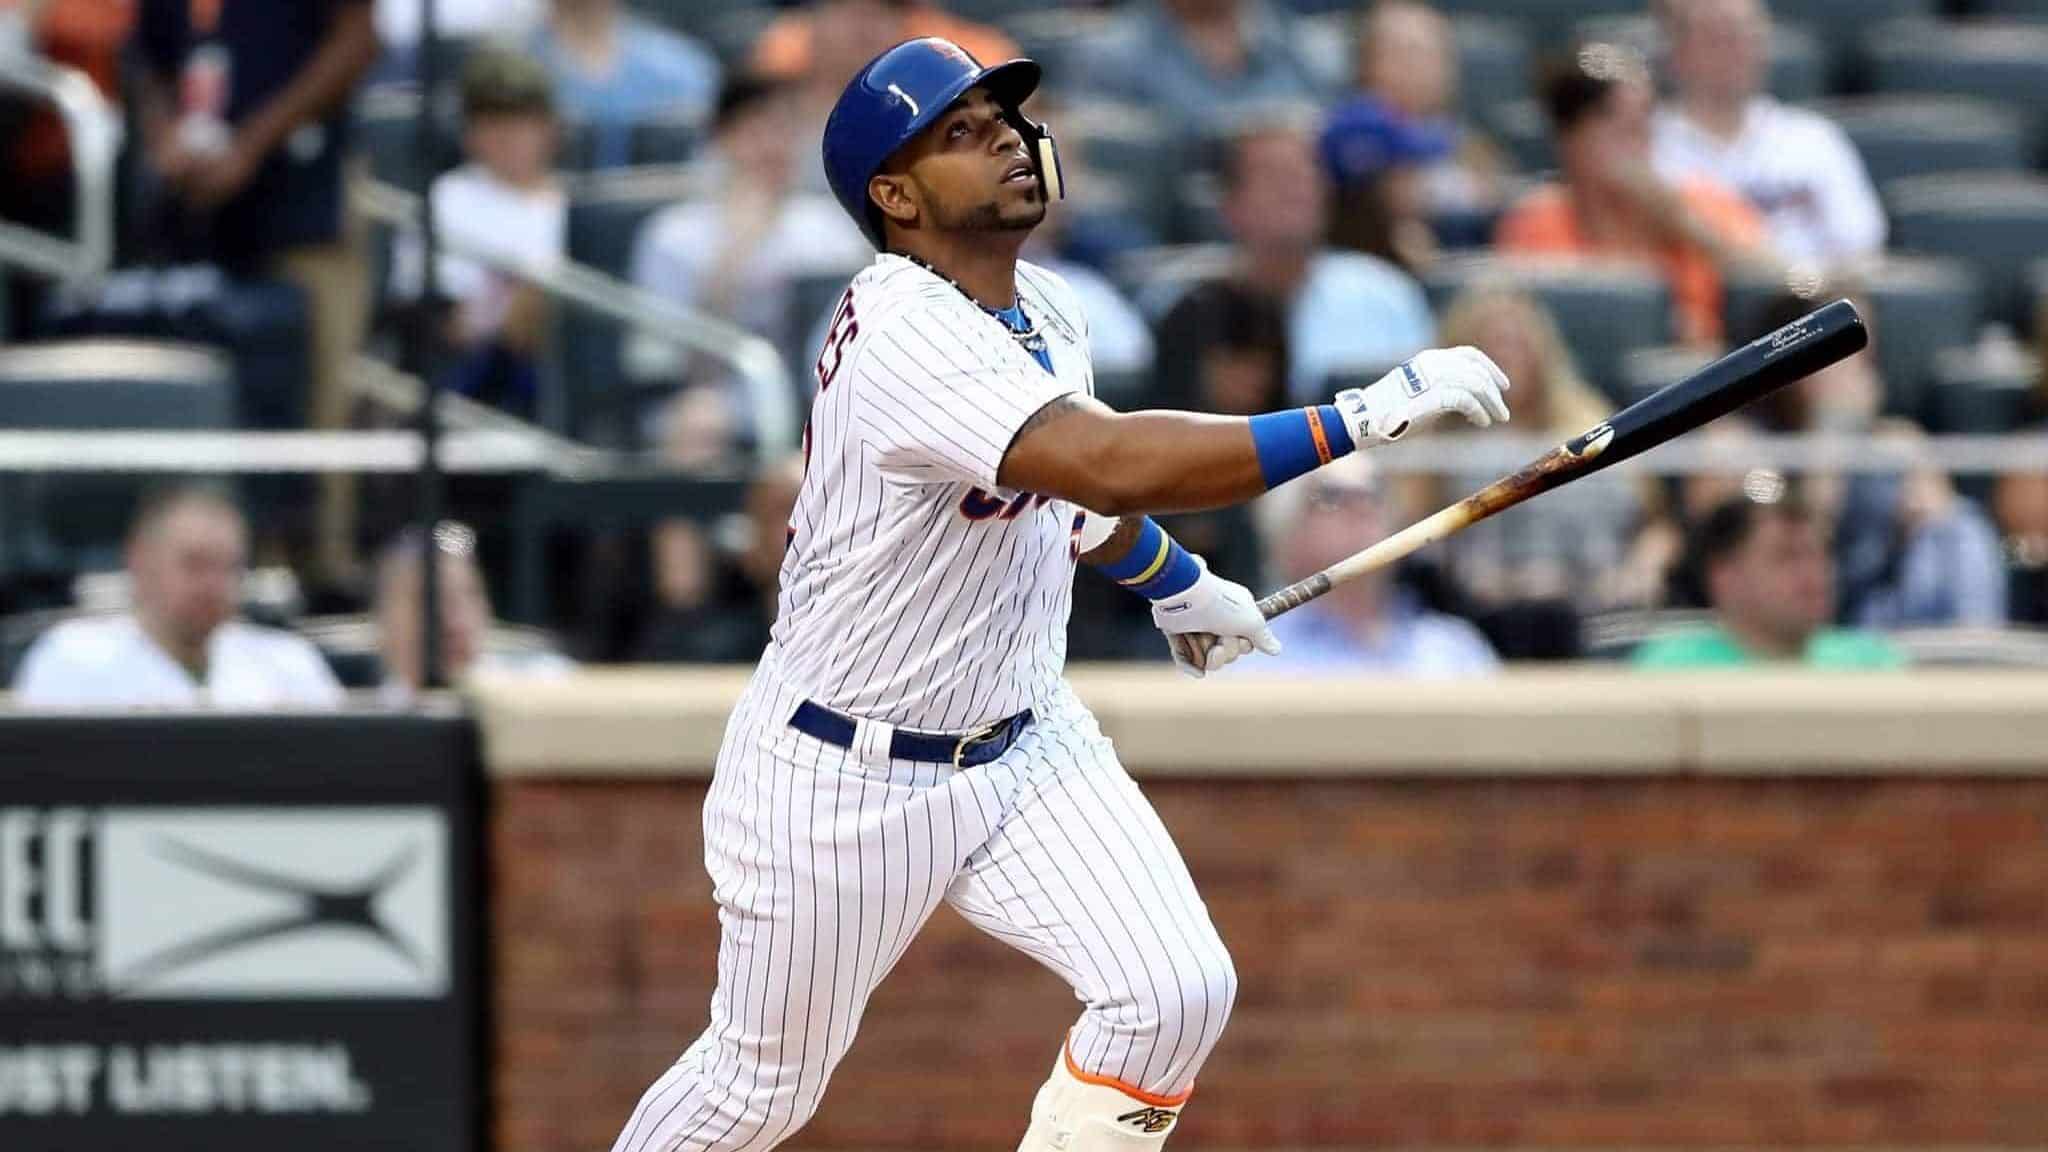 NEW YORK, NY - MAY 02: Yoenis Cespedes #52 of the New York Mets hits a double in the first inning against the Atlanta Braves on May 2, 2018 at Citi Field in the Flushing neighborhood of the Queens borough of New York City.